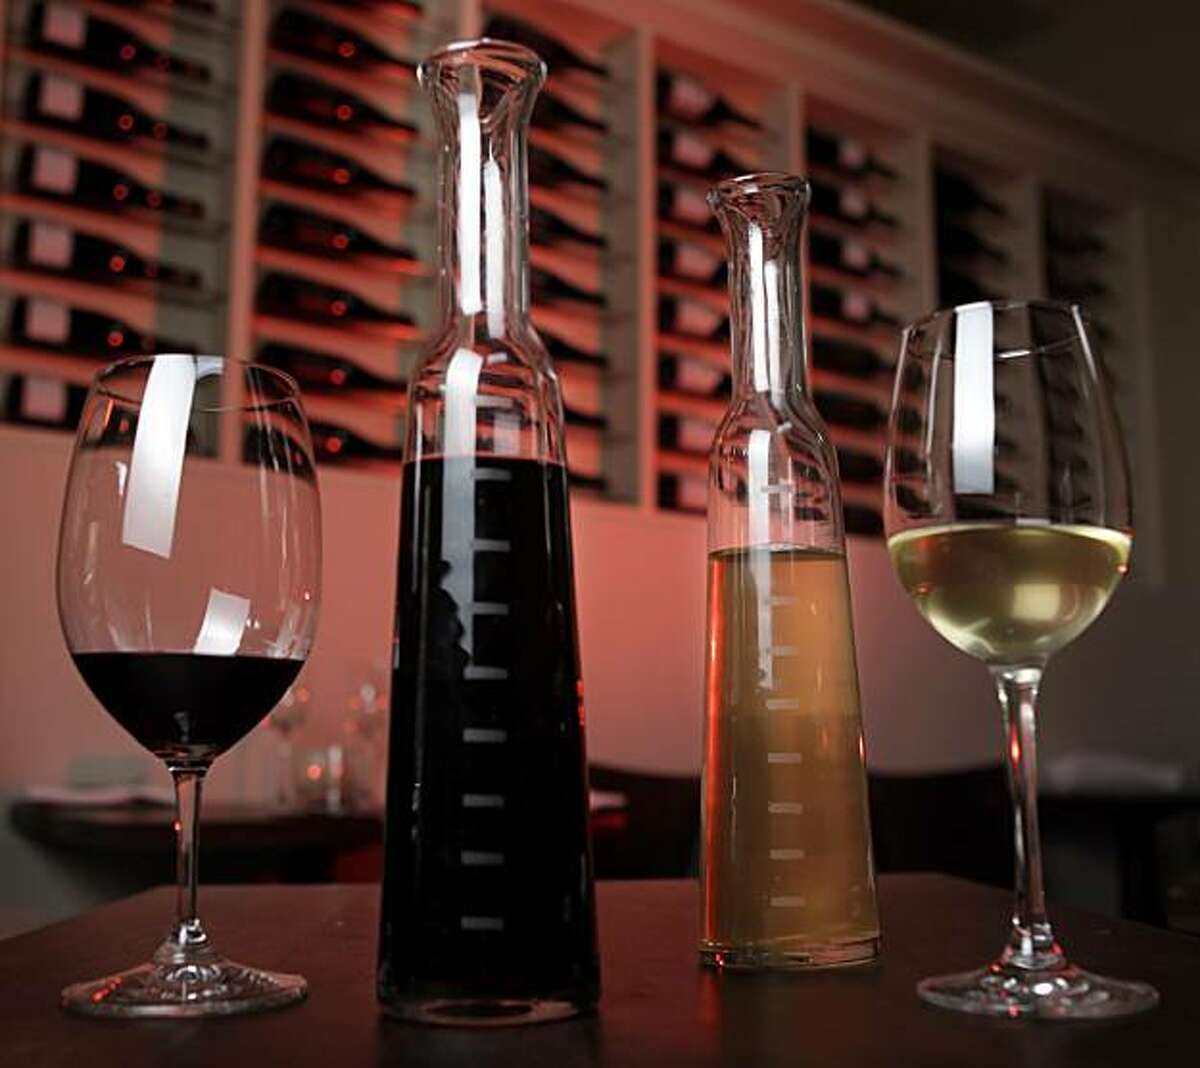 A bottle of red and white blend wine are what is served as the house wines on tap at Frances restaurant, March 28, 2010, in San Francisco, Calif. The bottles are marked every two ounces and are charged one dollar an ounce.